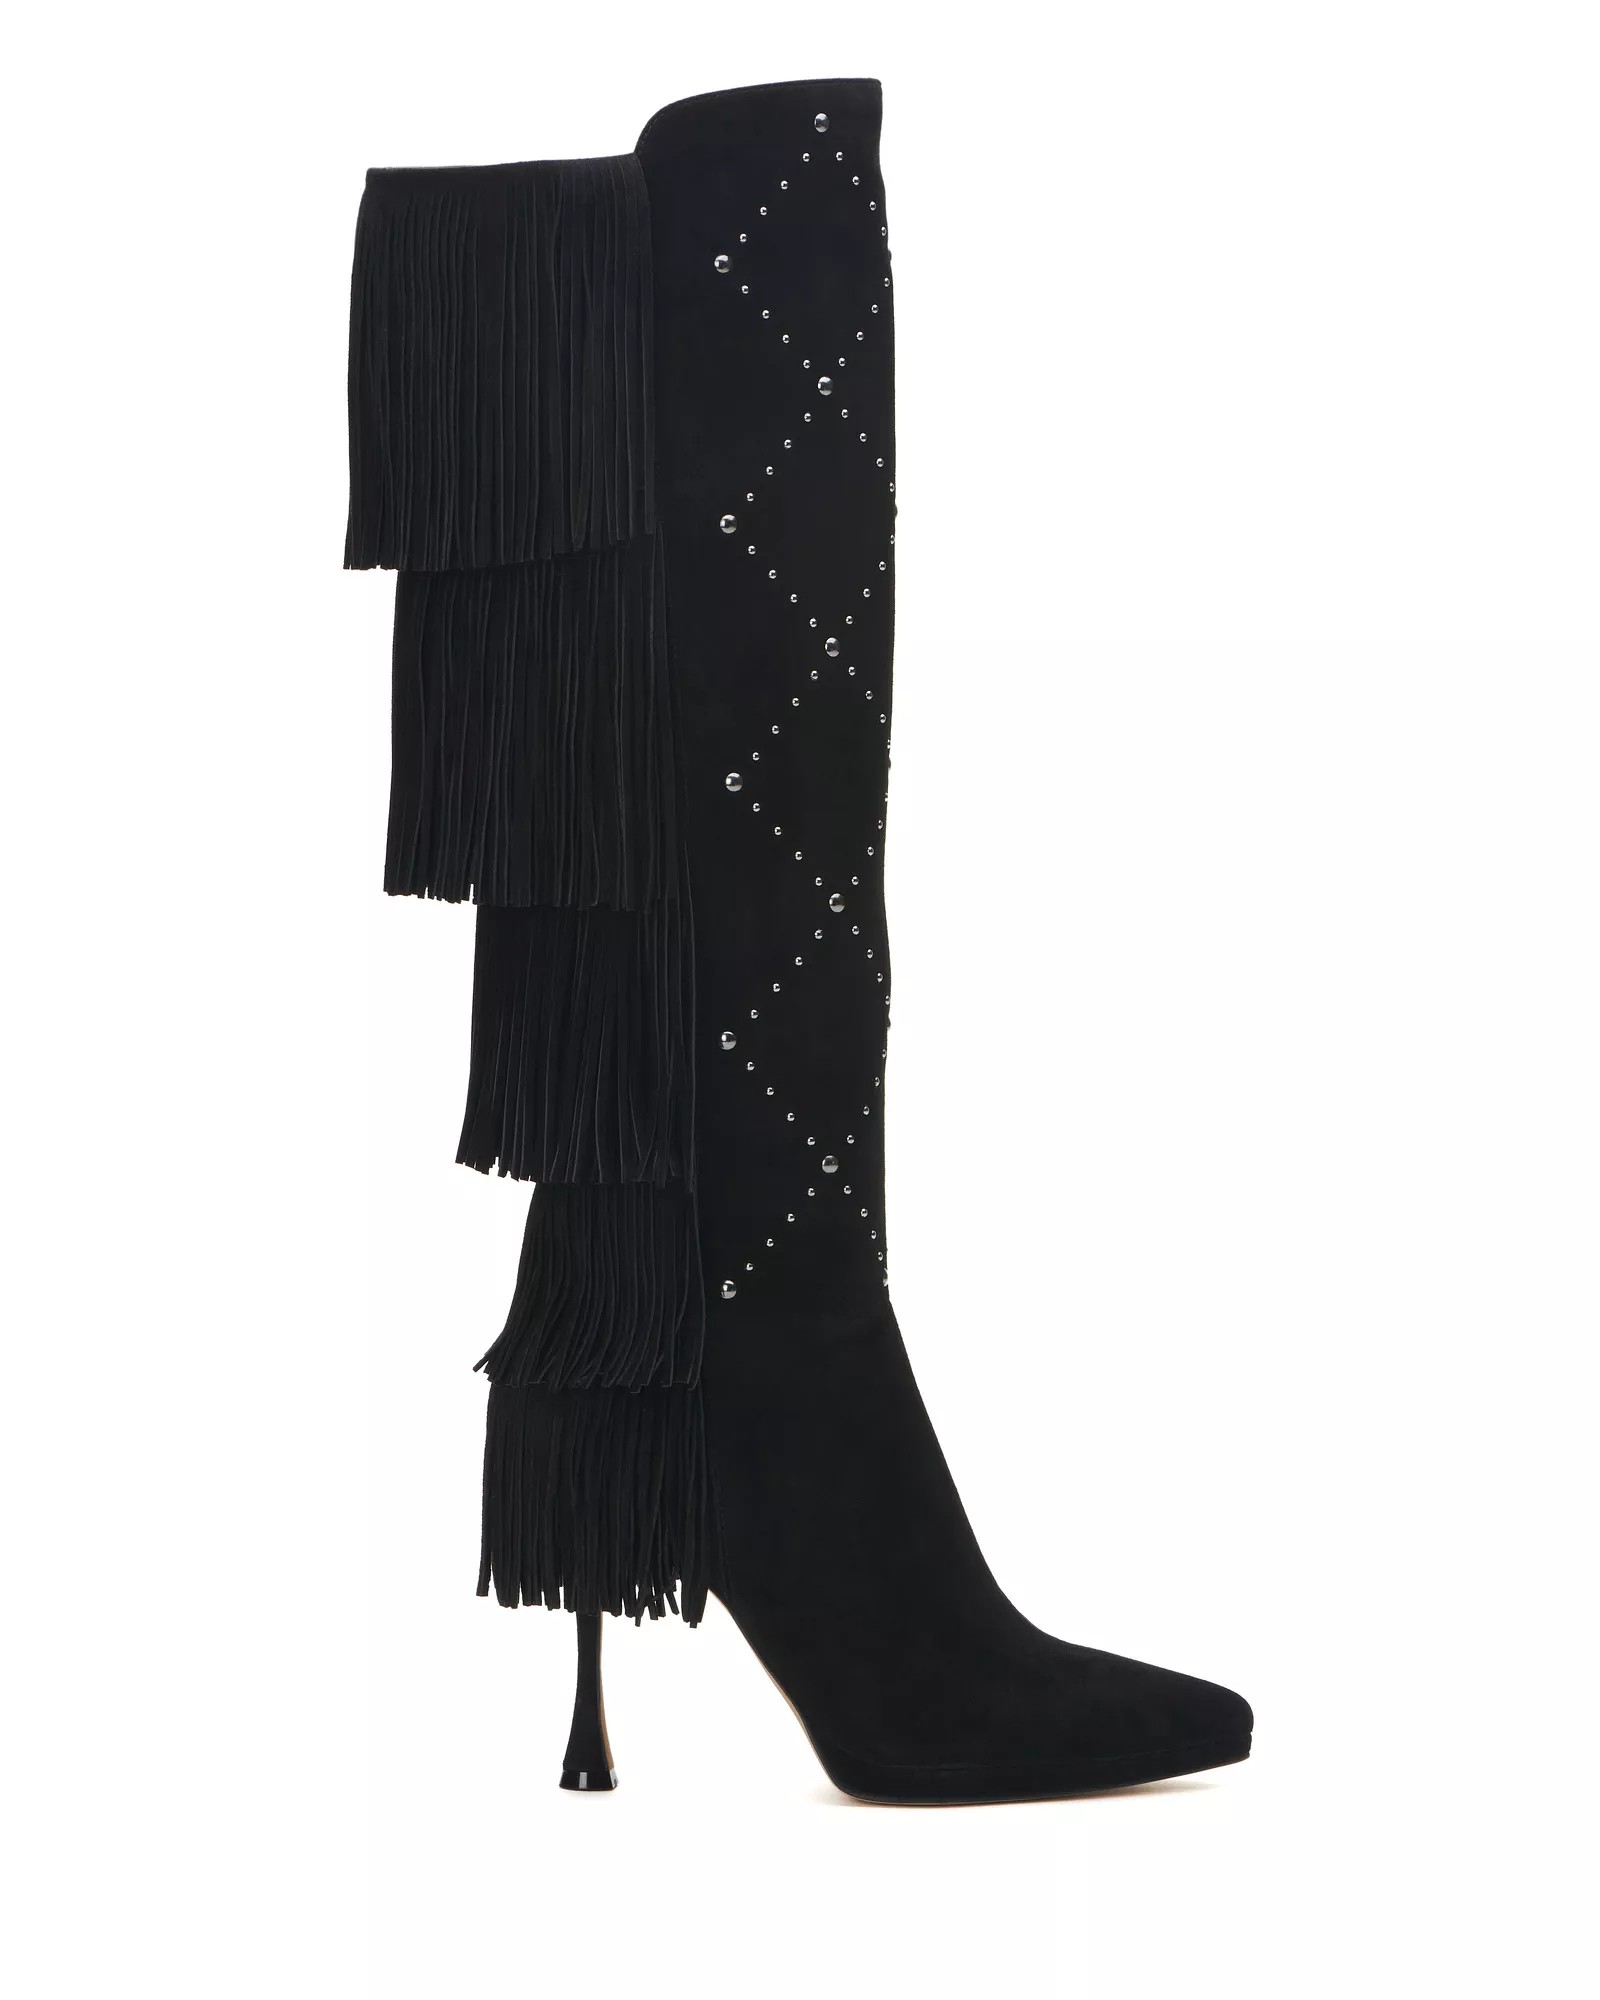 Vince Camuto Panaryaz Over The Knee Boot